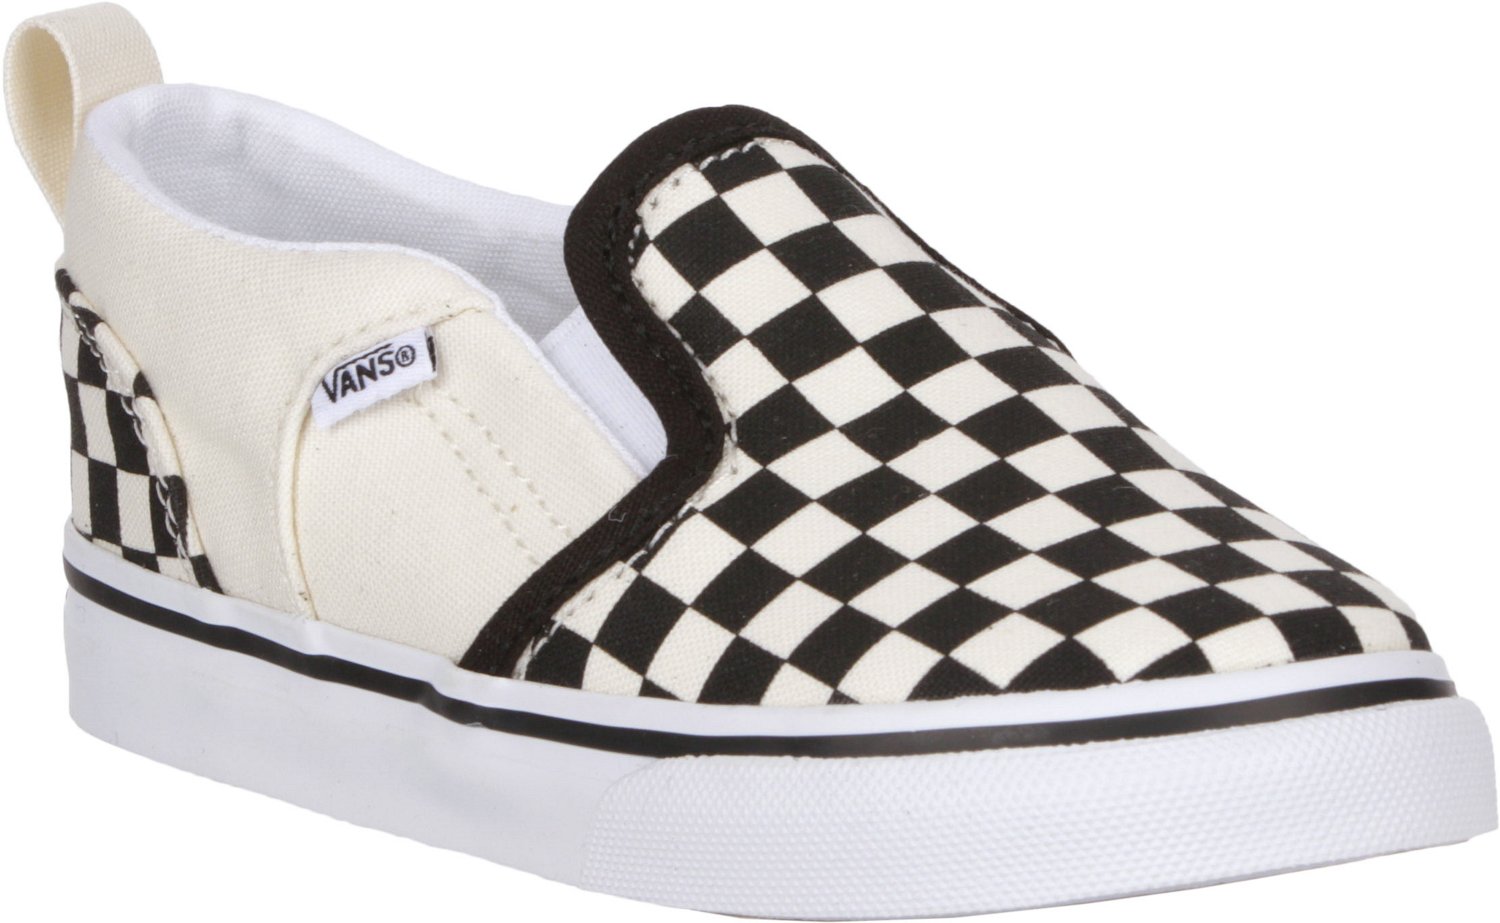 Vans Toddlers' Asher V Shoes | Academy